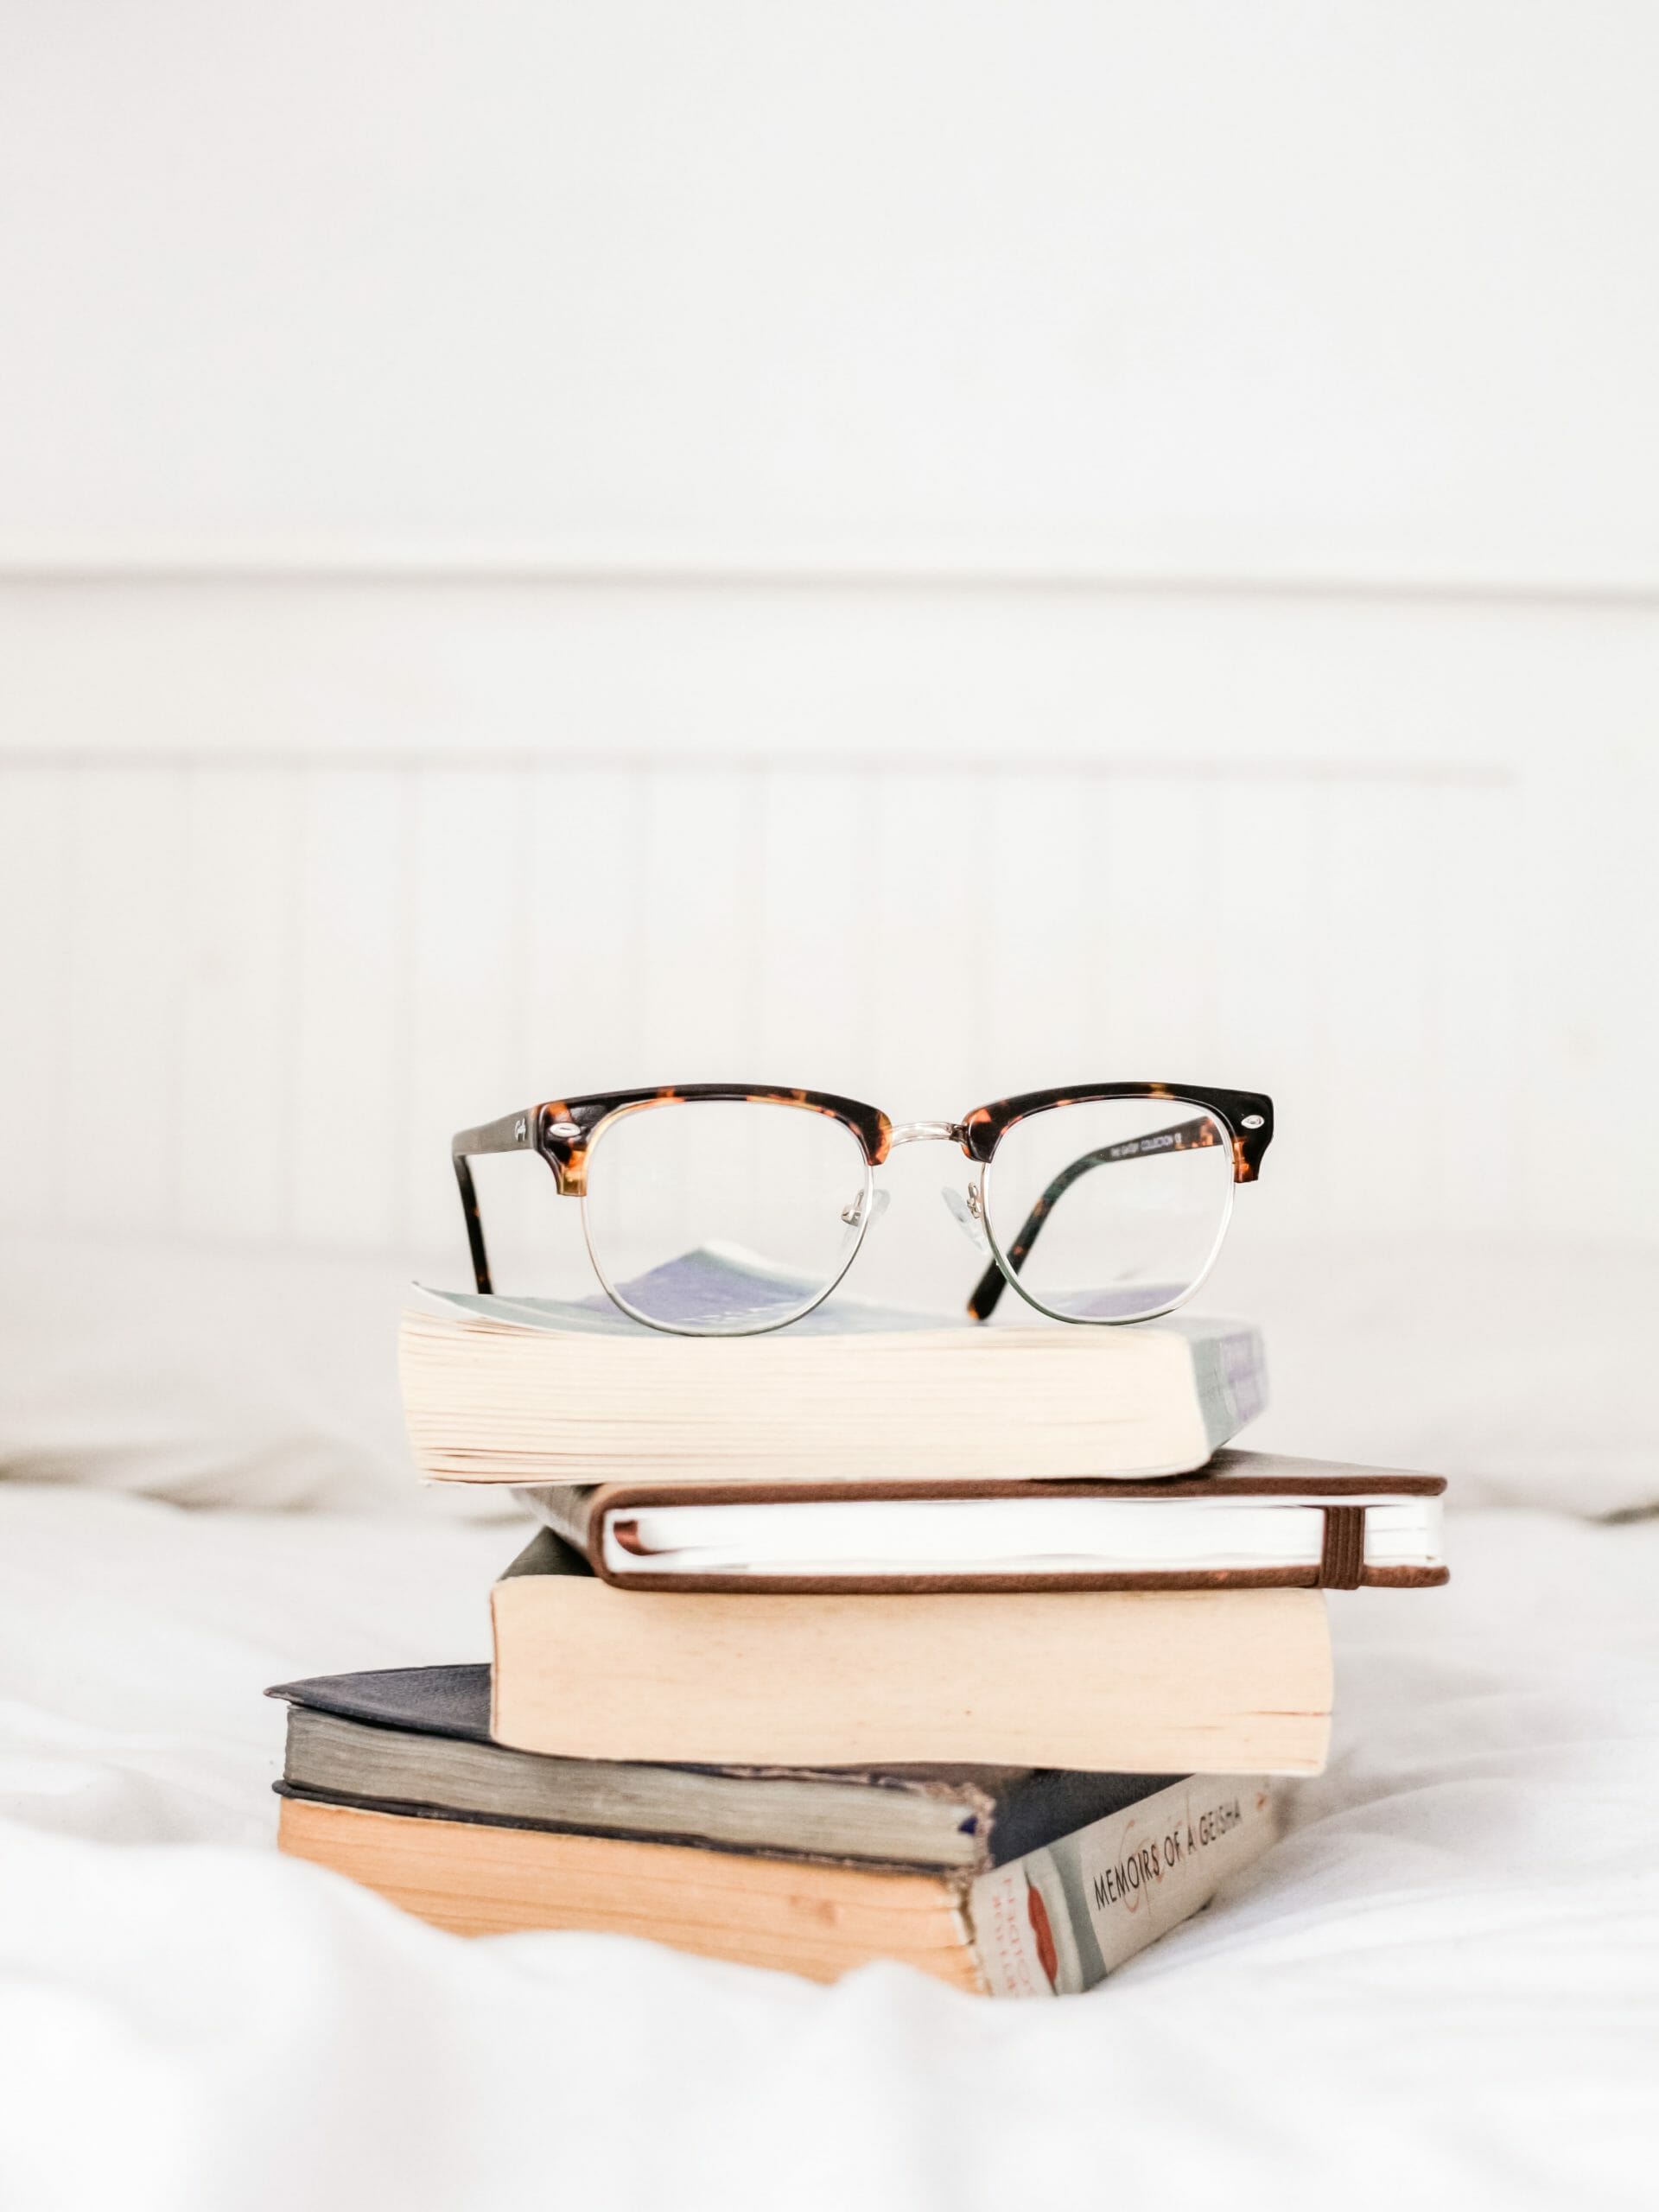 Pair of glasses on top of book pile - Legal Design Blog Something Simple First